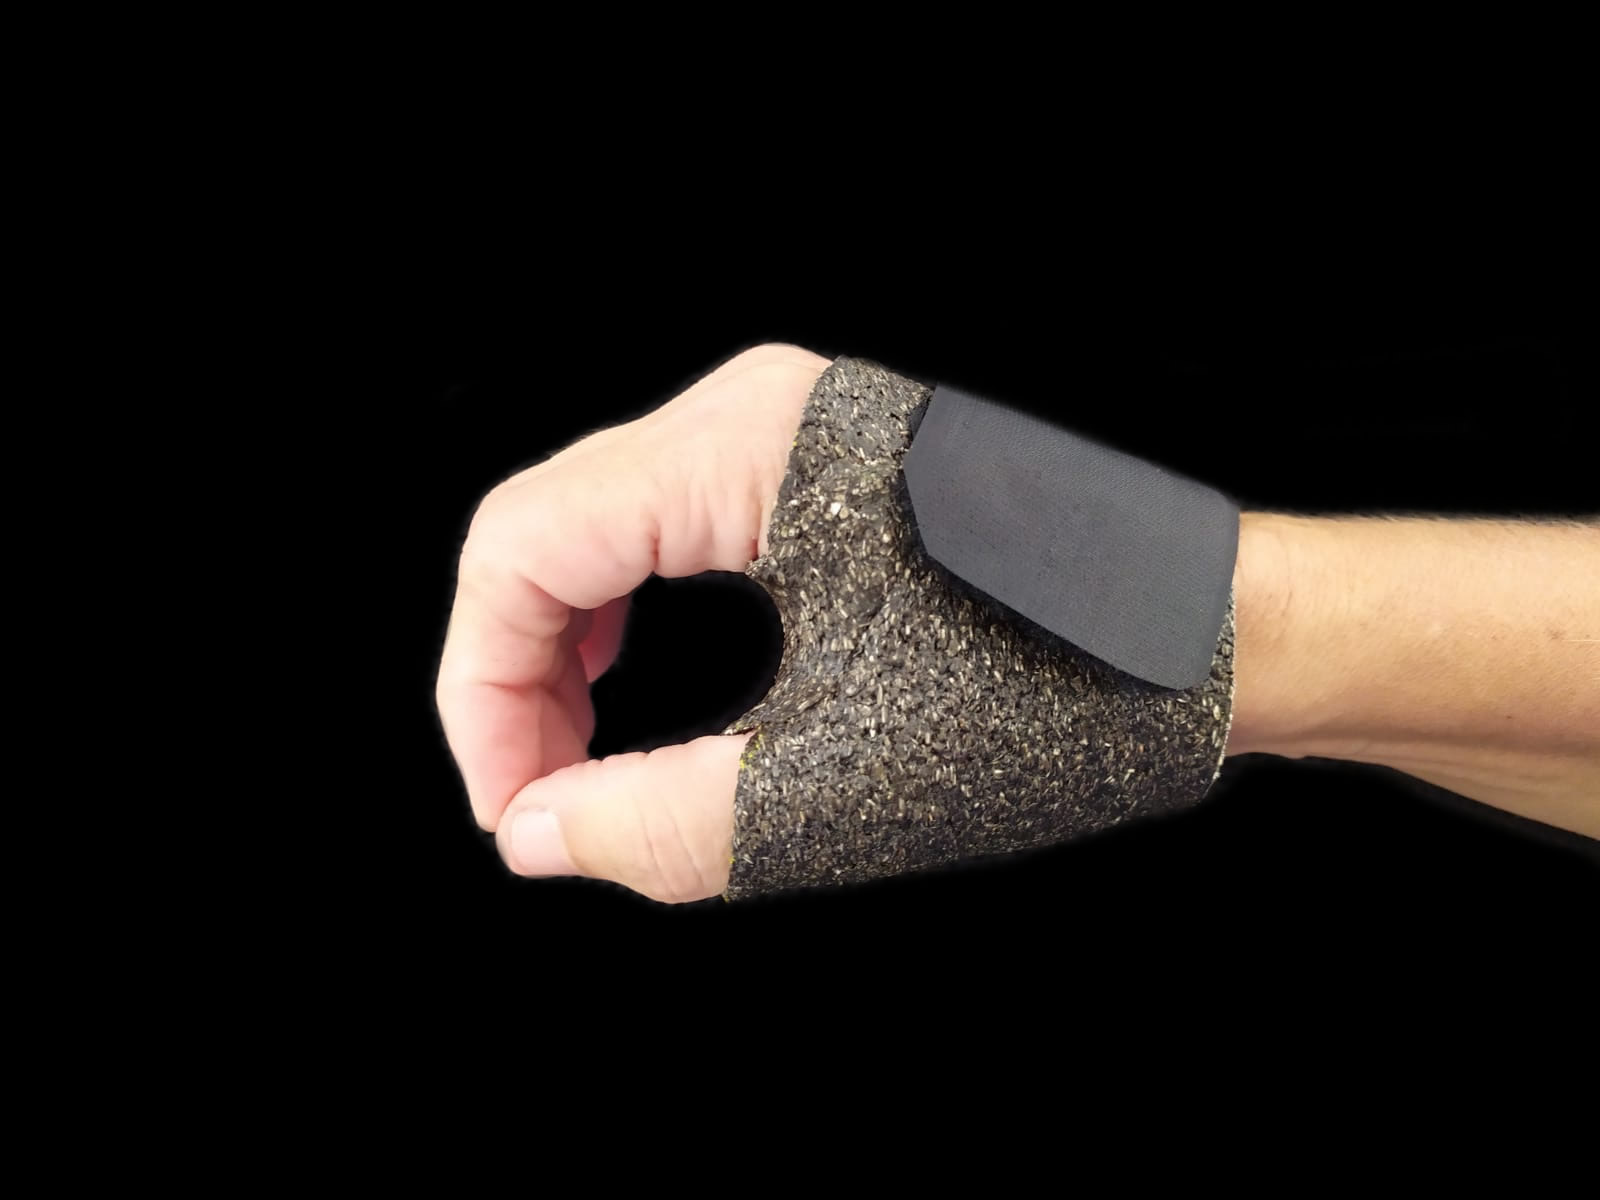 Custom made hand and wrist splints. Recommendations for proper use to avoid complications.